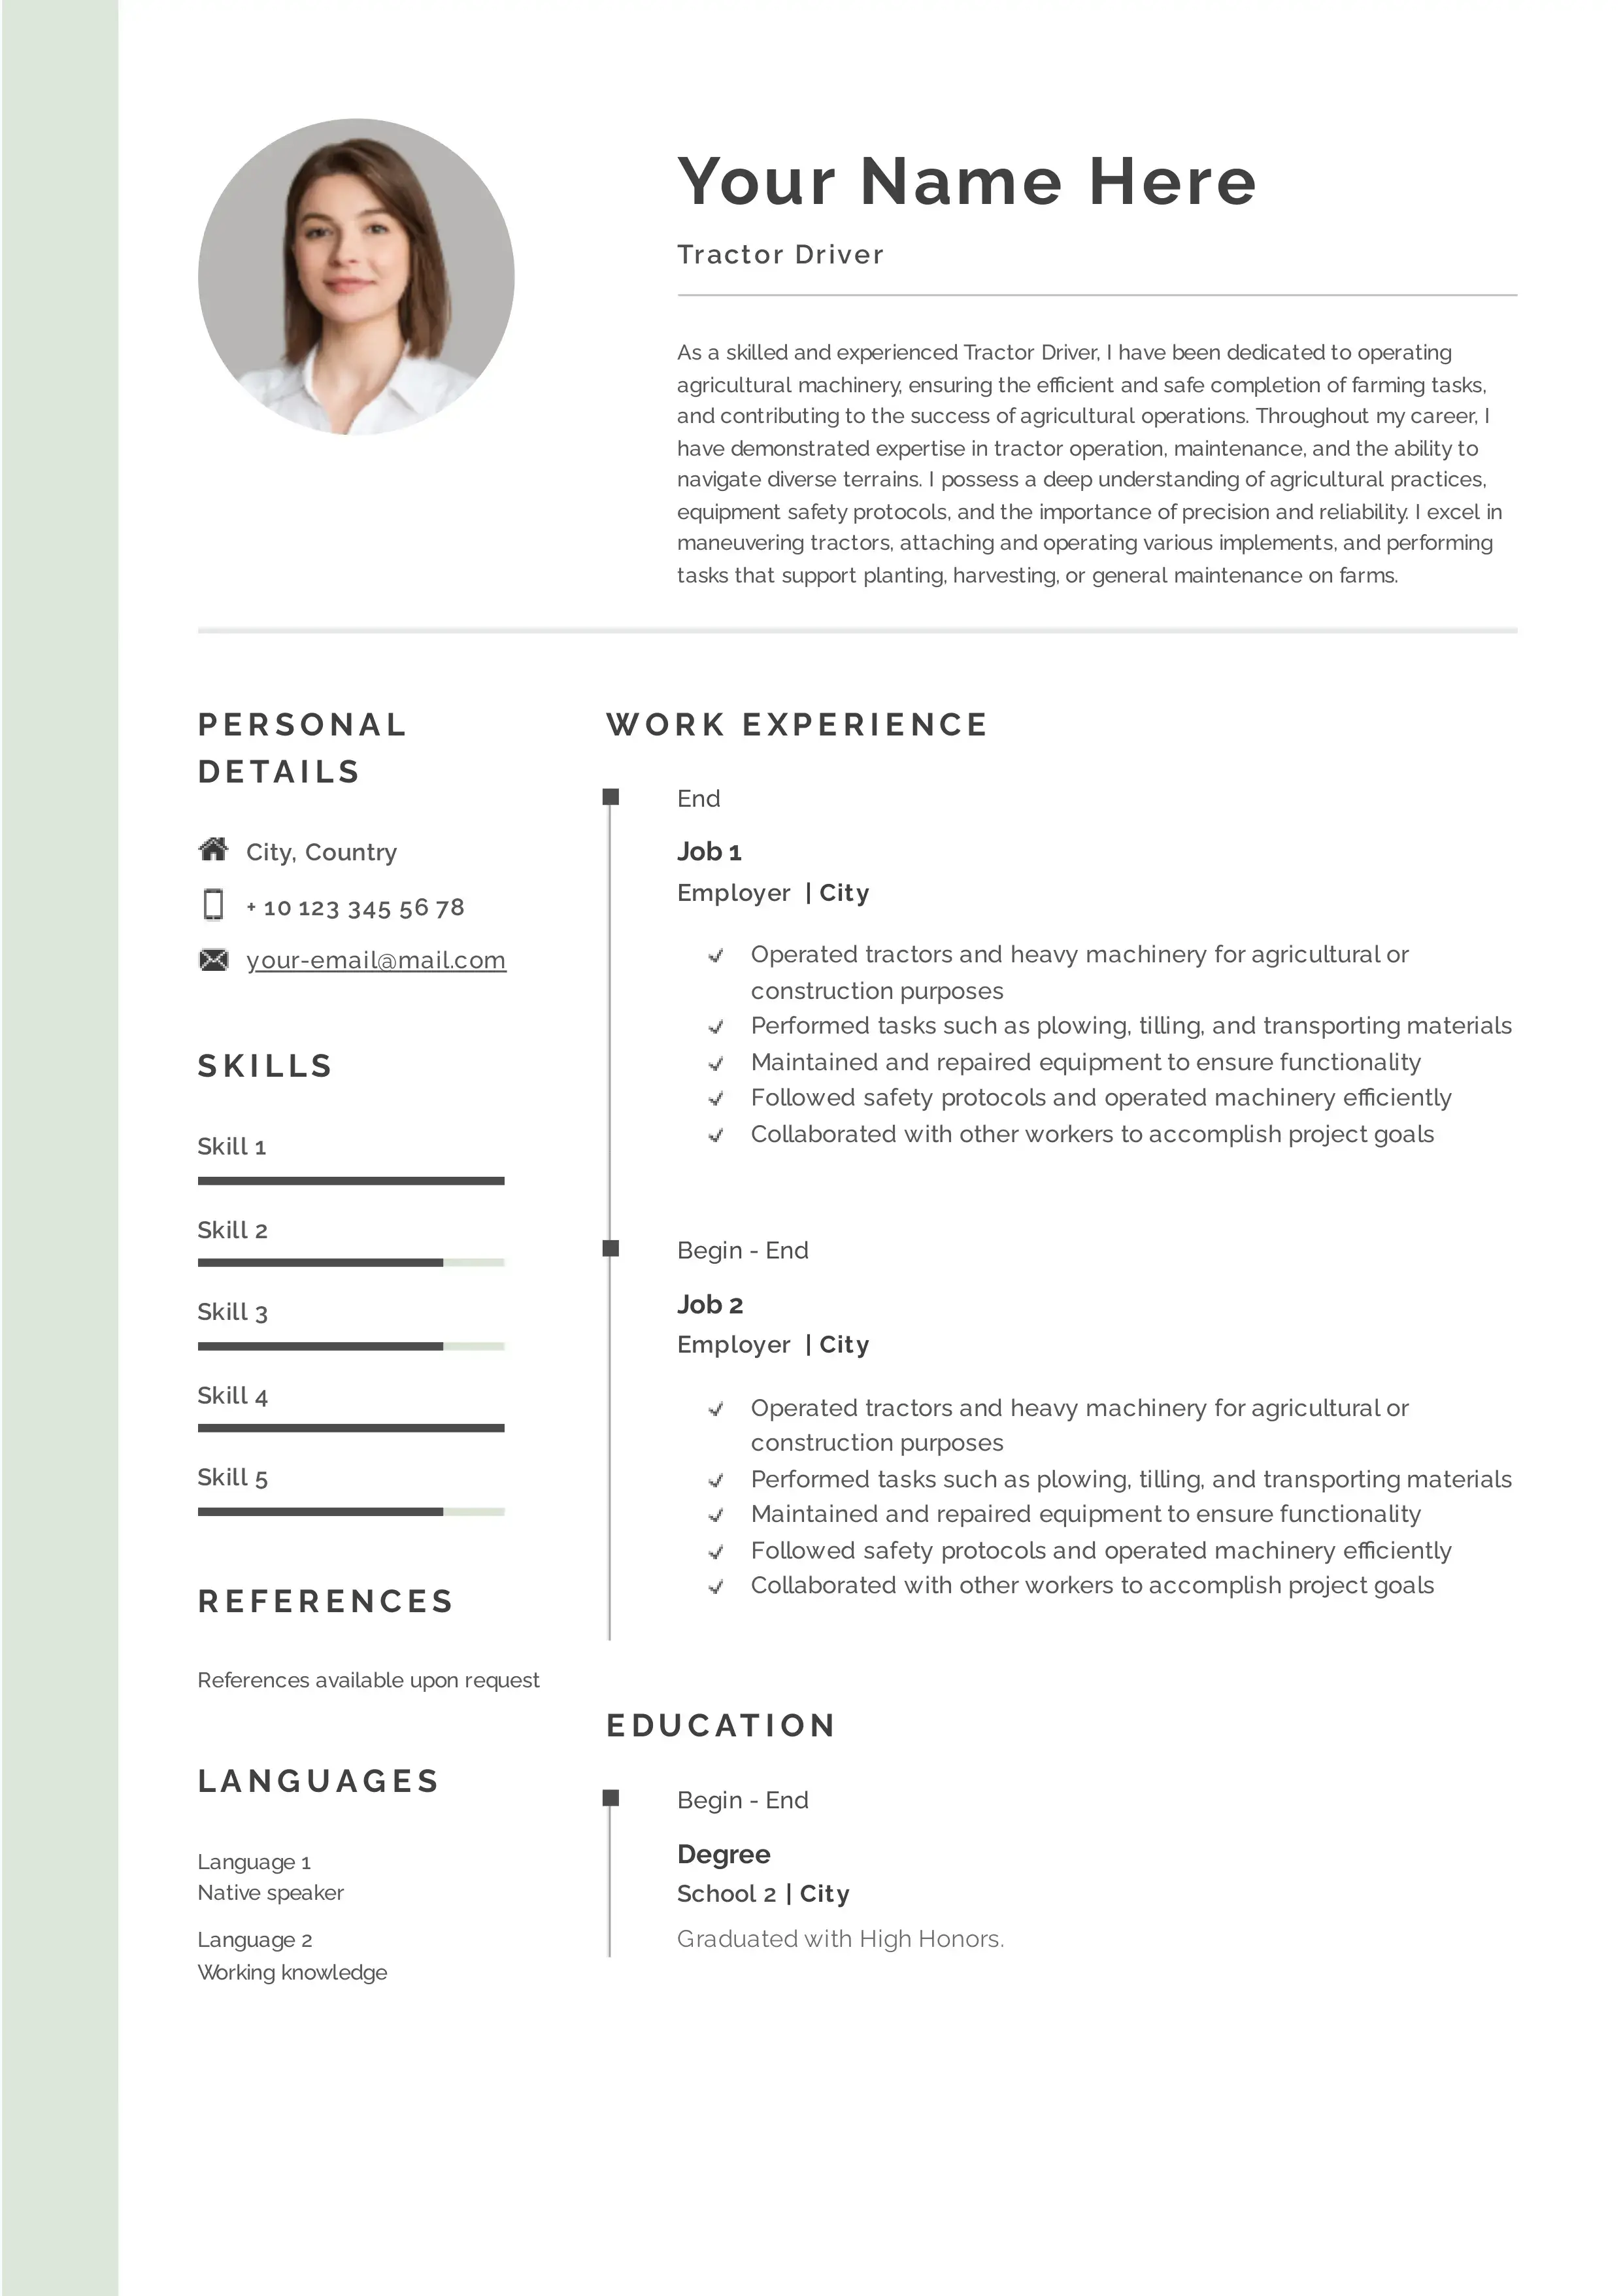 Tractor driver resume CV examples